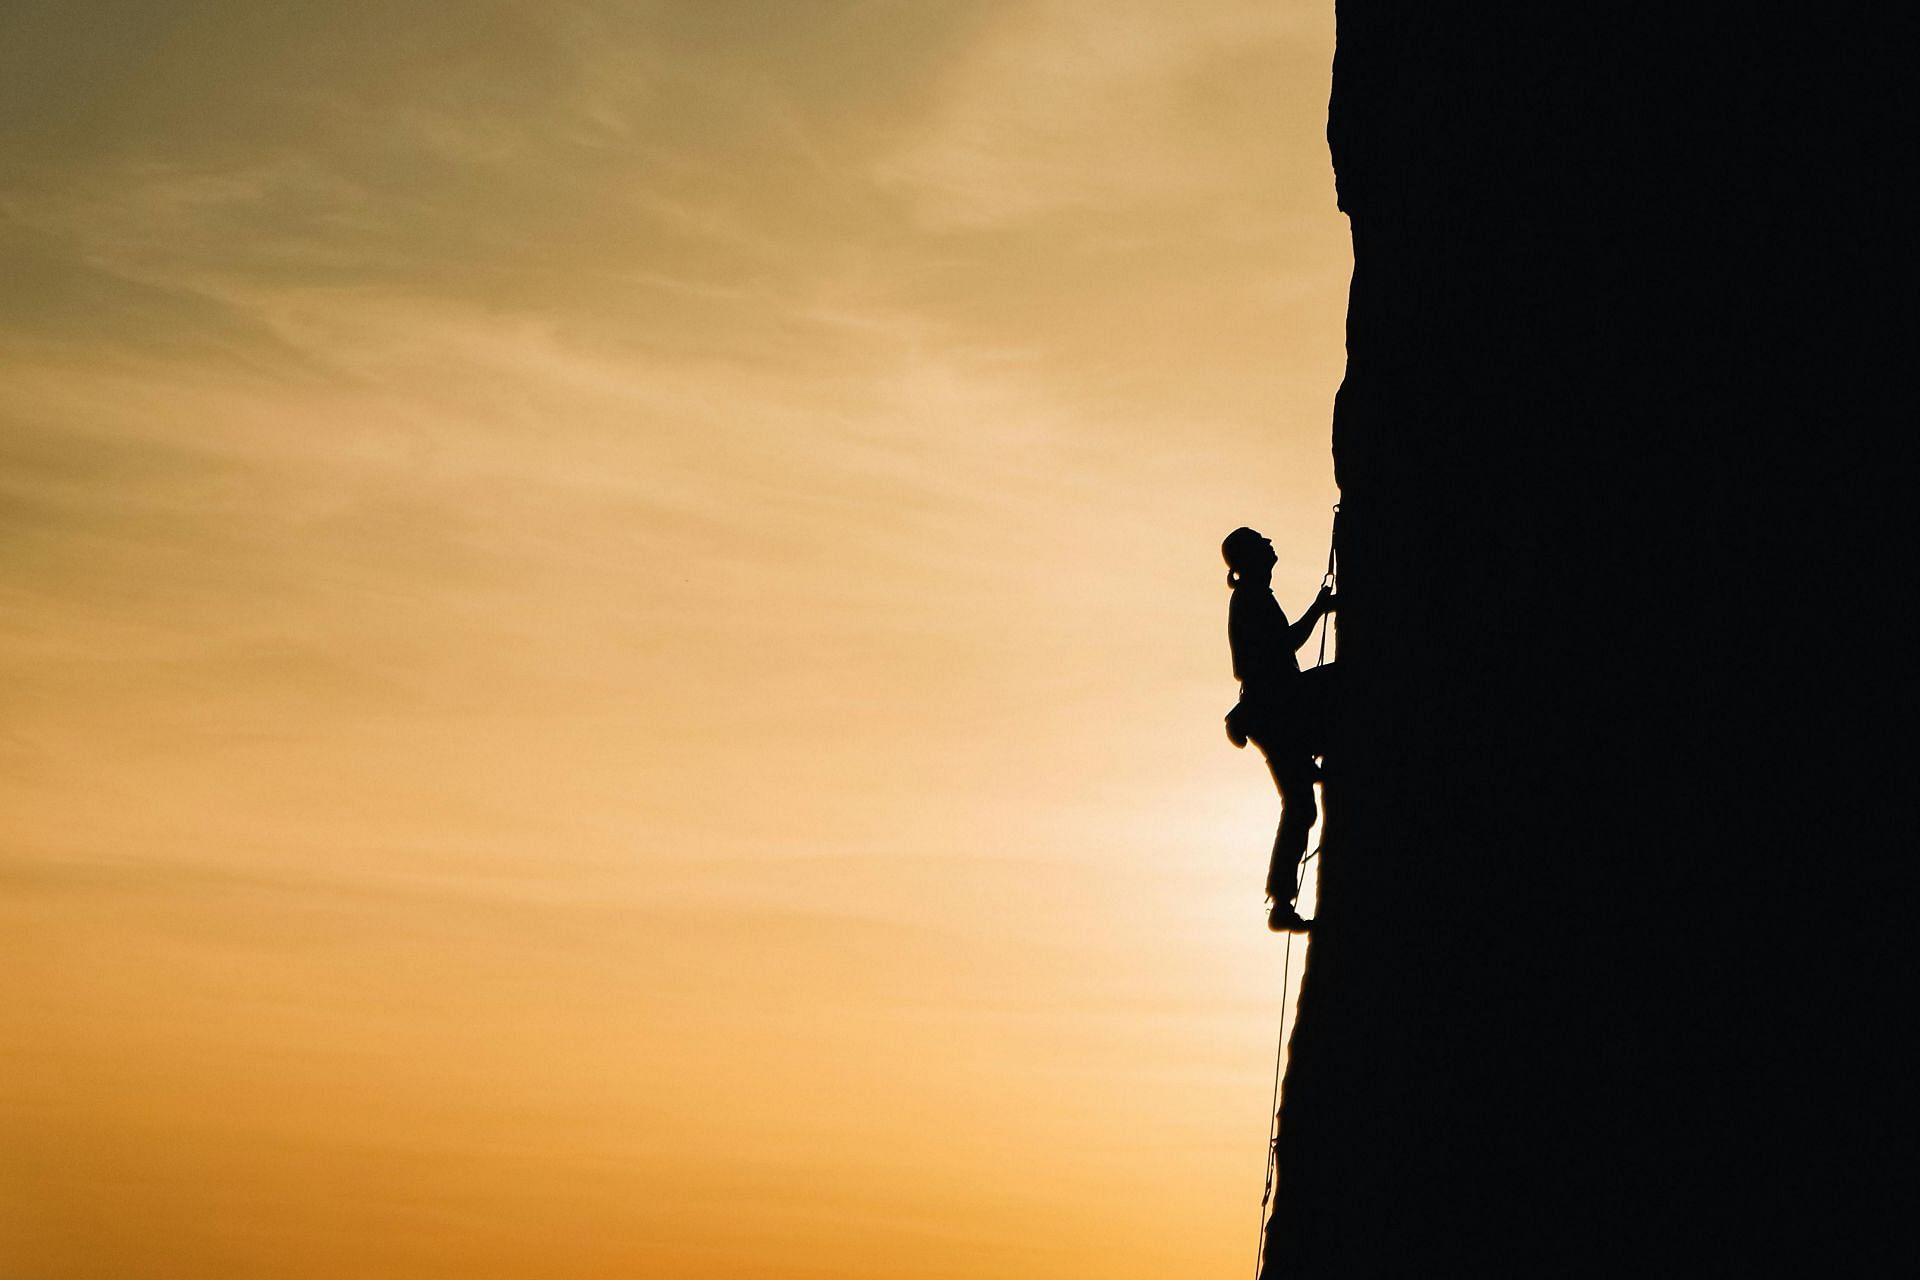 Importance of rock climbing (image sourced via Pexels / Photo by ahha)